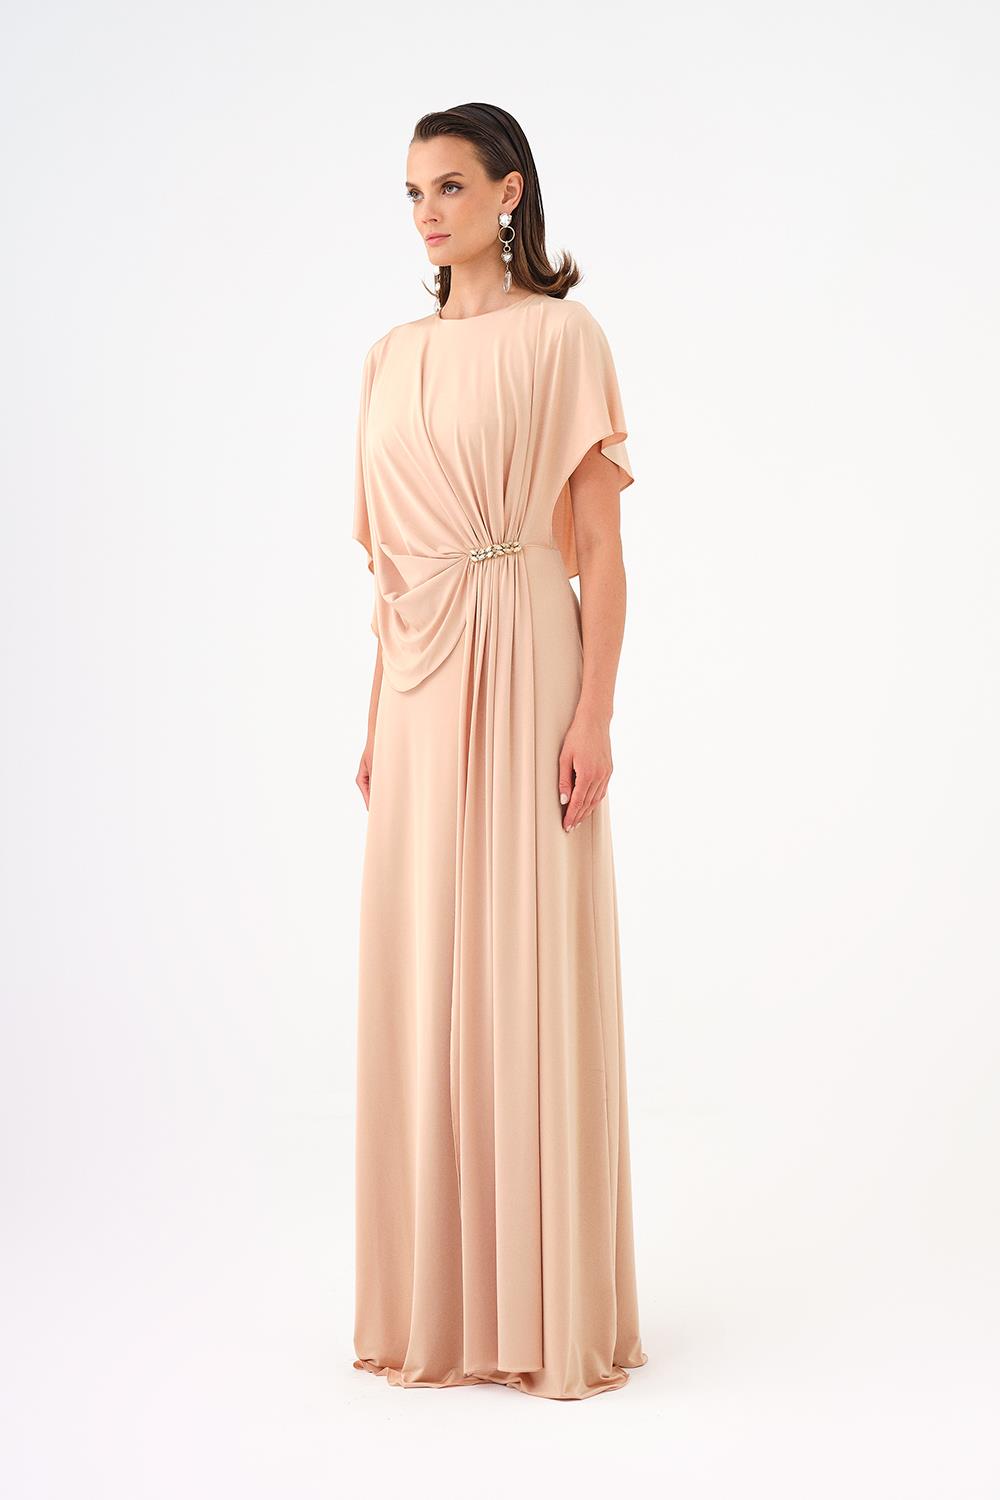 Stone Embroidery Detailed Half Sleeve Draped Long Evening Dress